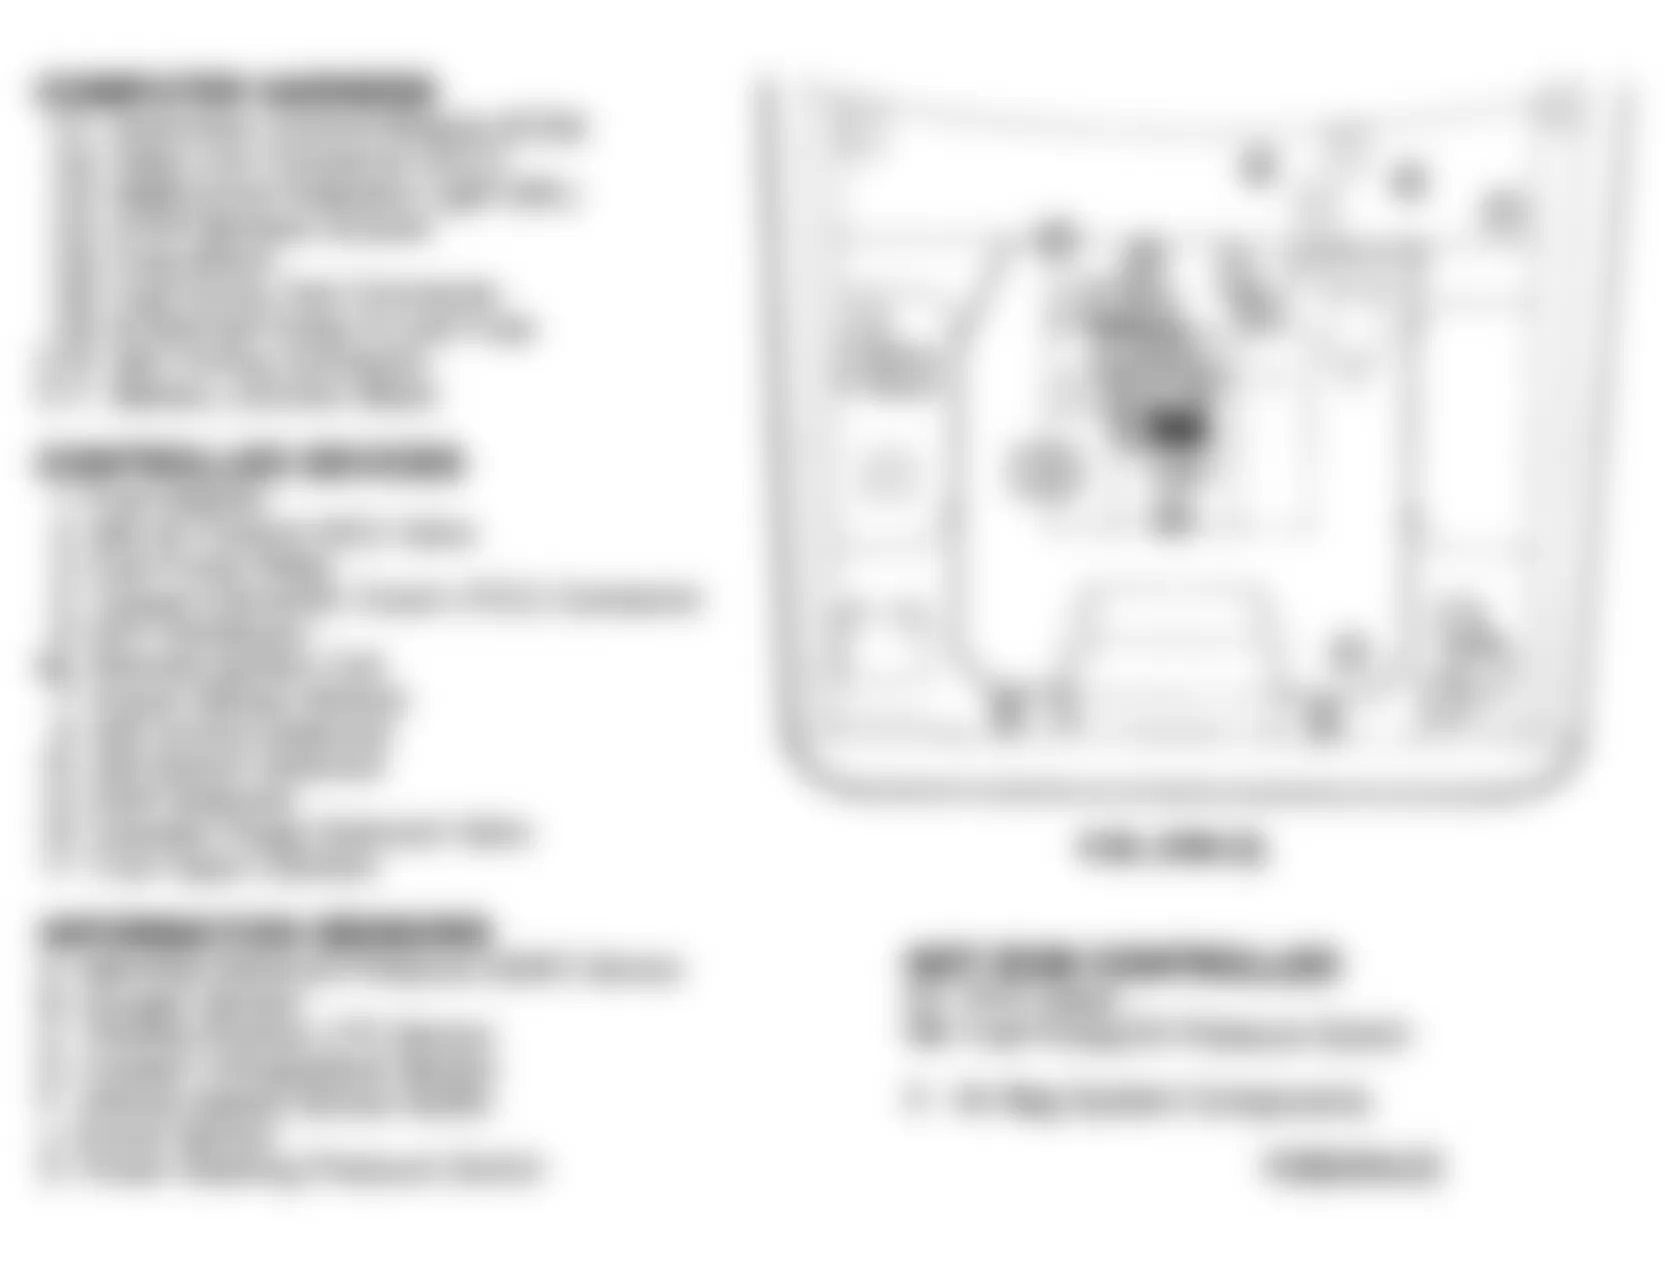 Buick Roadmaster Limited 1993 - Component Locations -  Component Locations (2 Of 4)